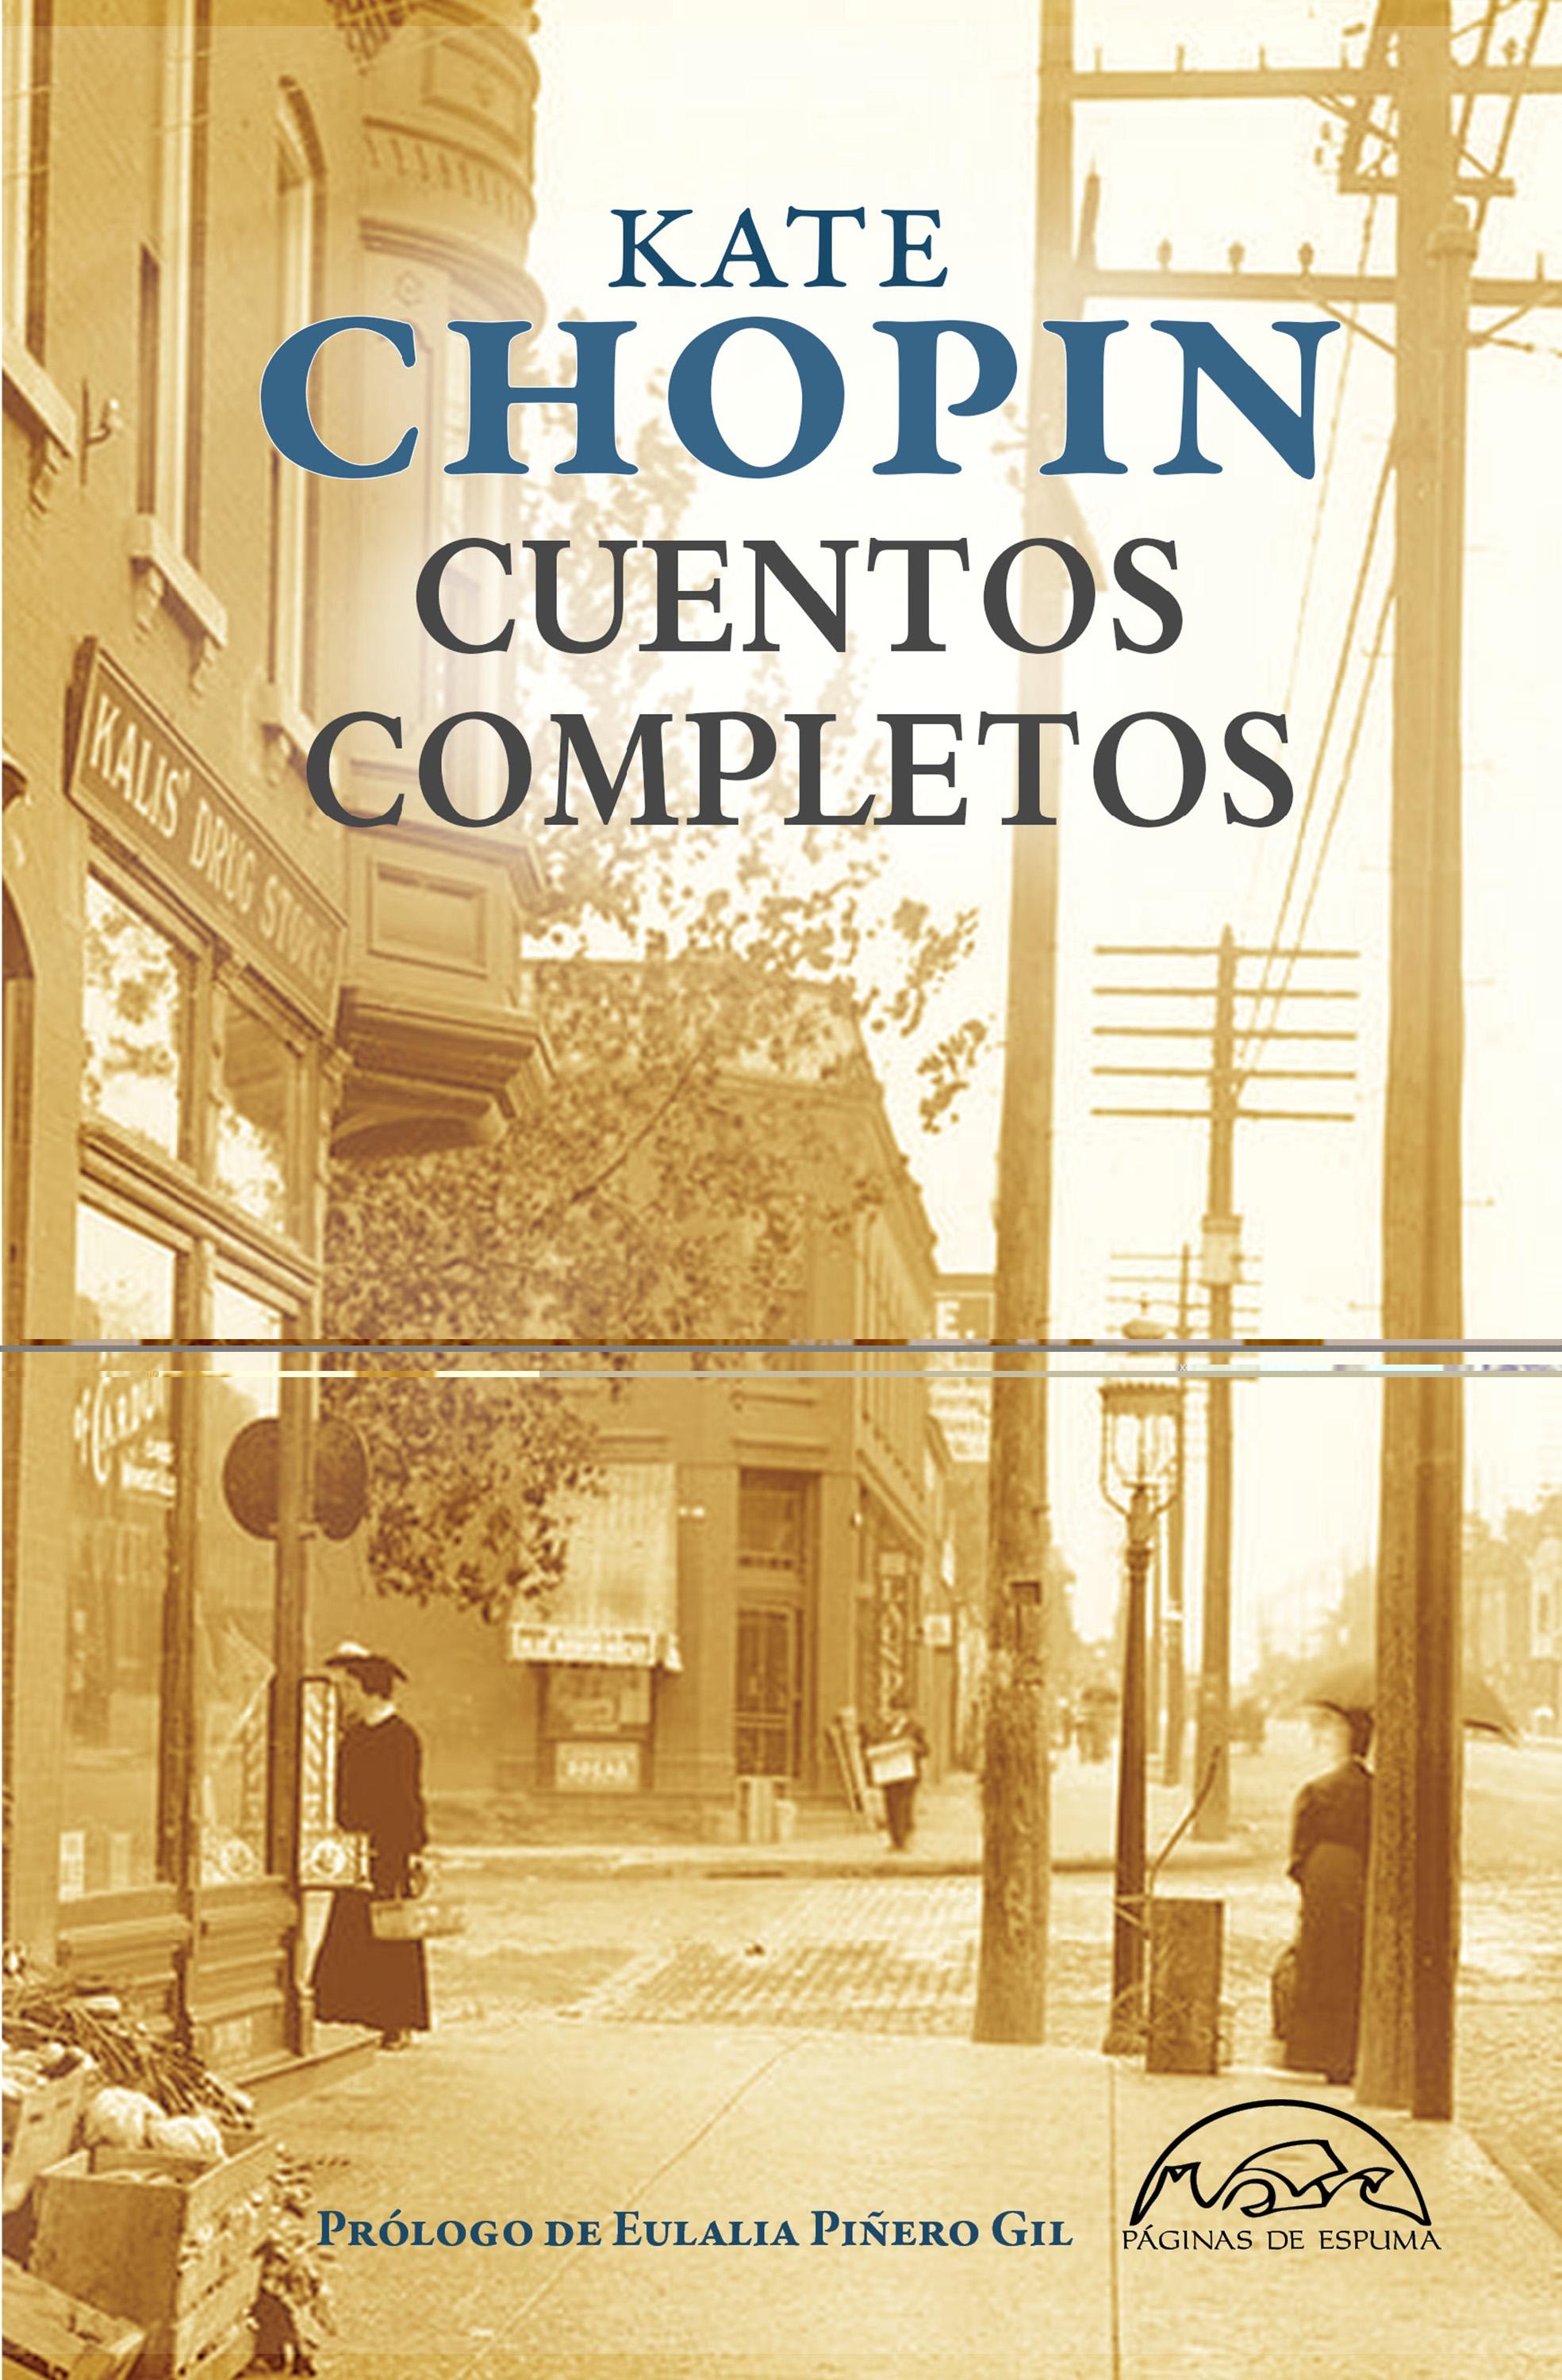 Cuentos completos "(Kate Chopin)". 